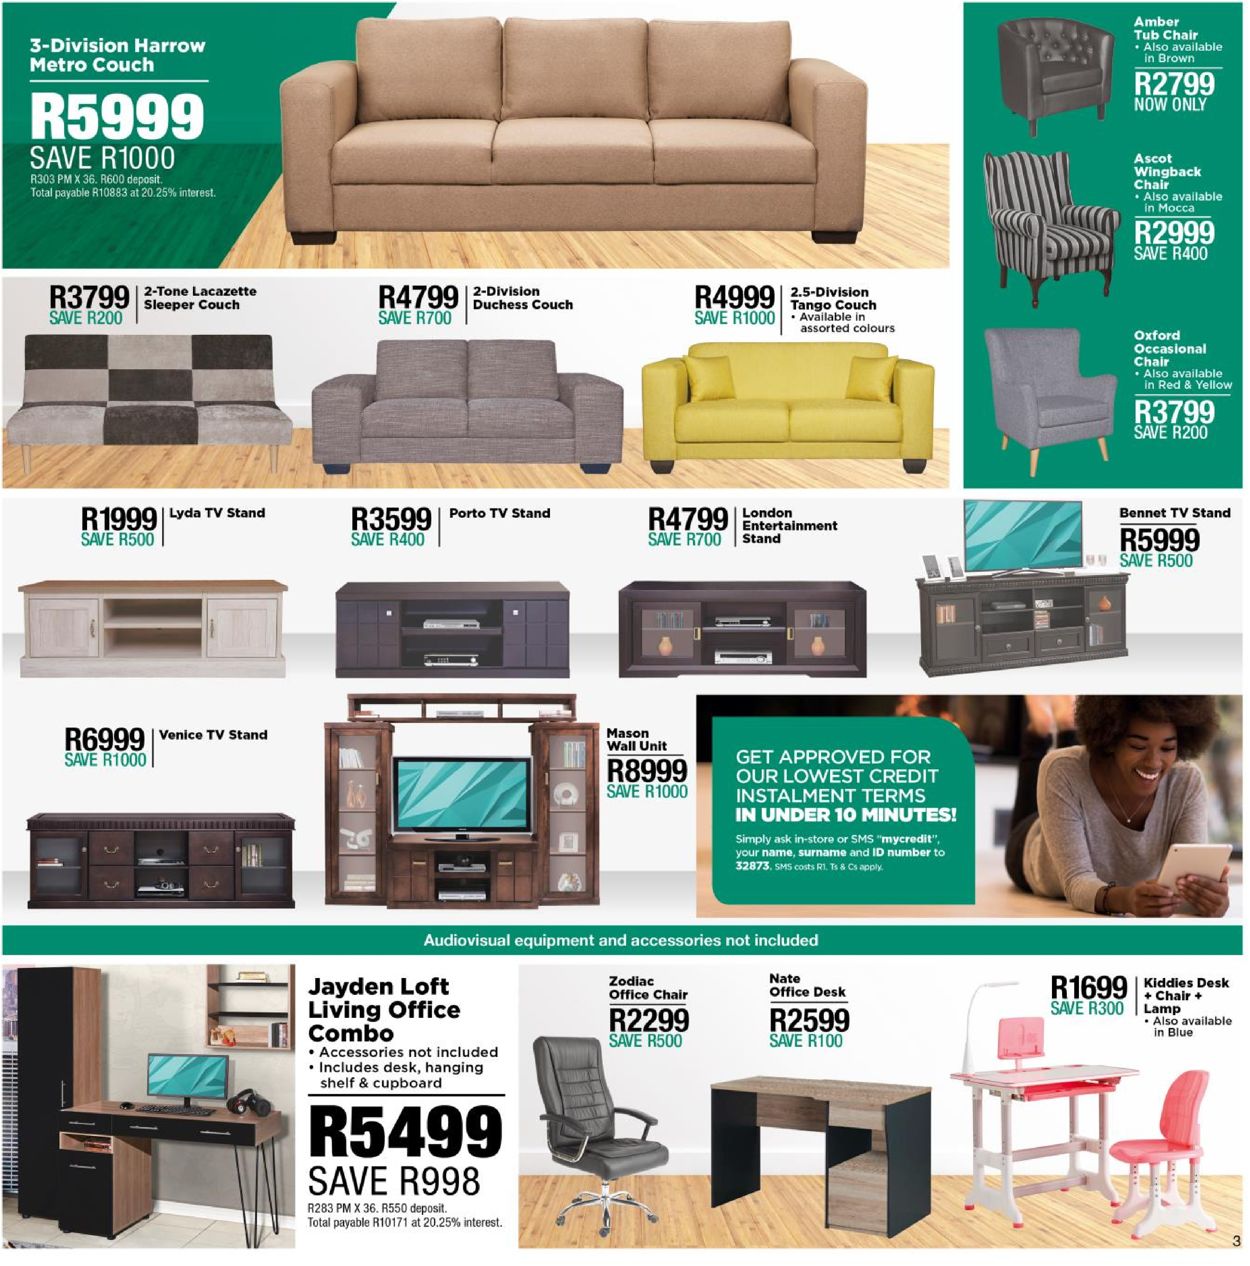 House & Home Catalogue from 2022/05/30